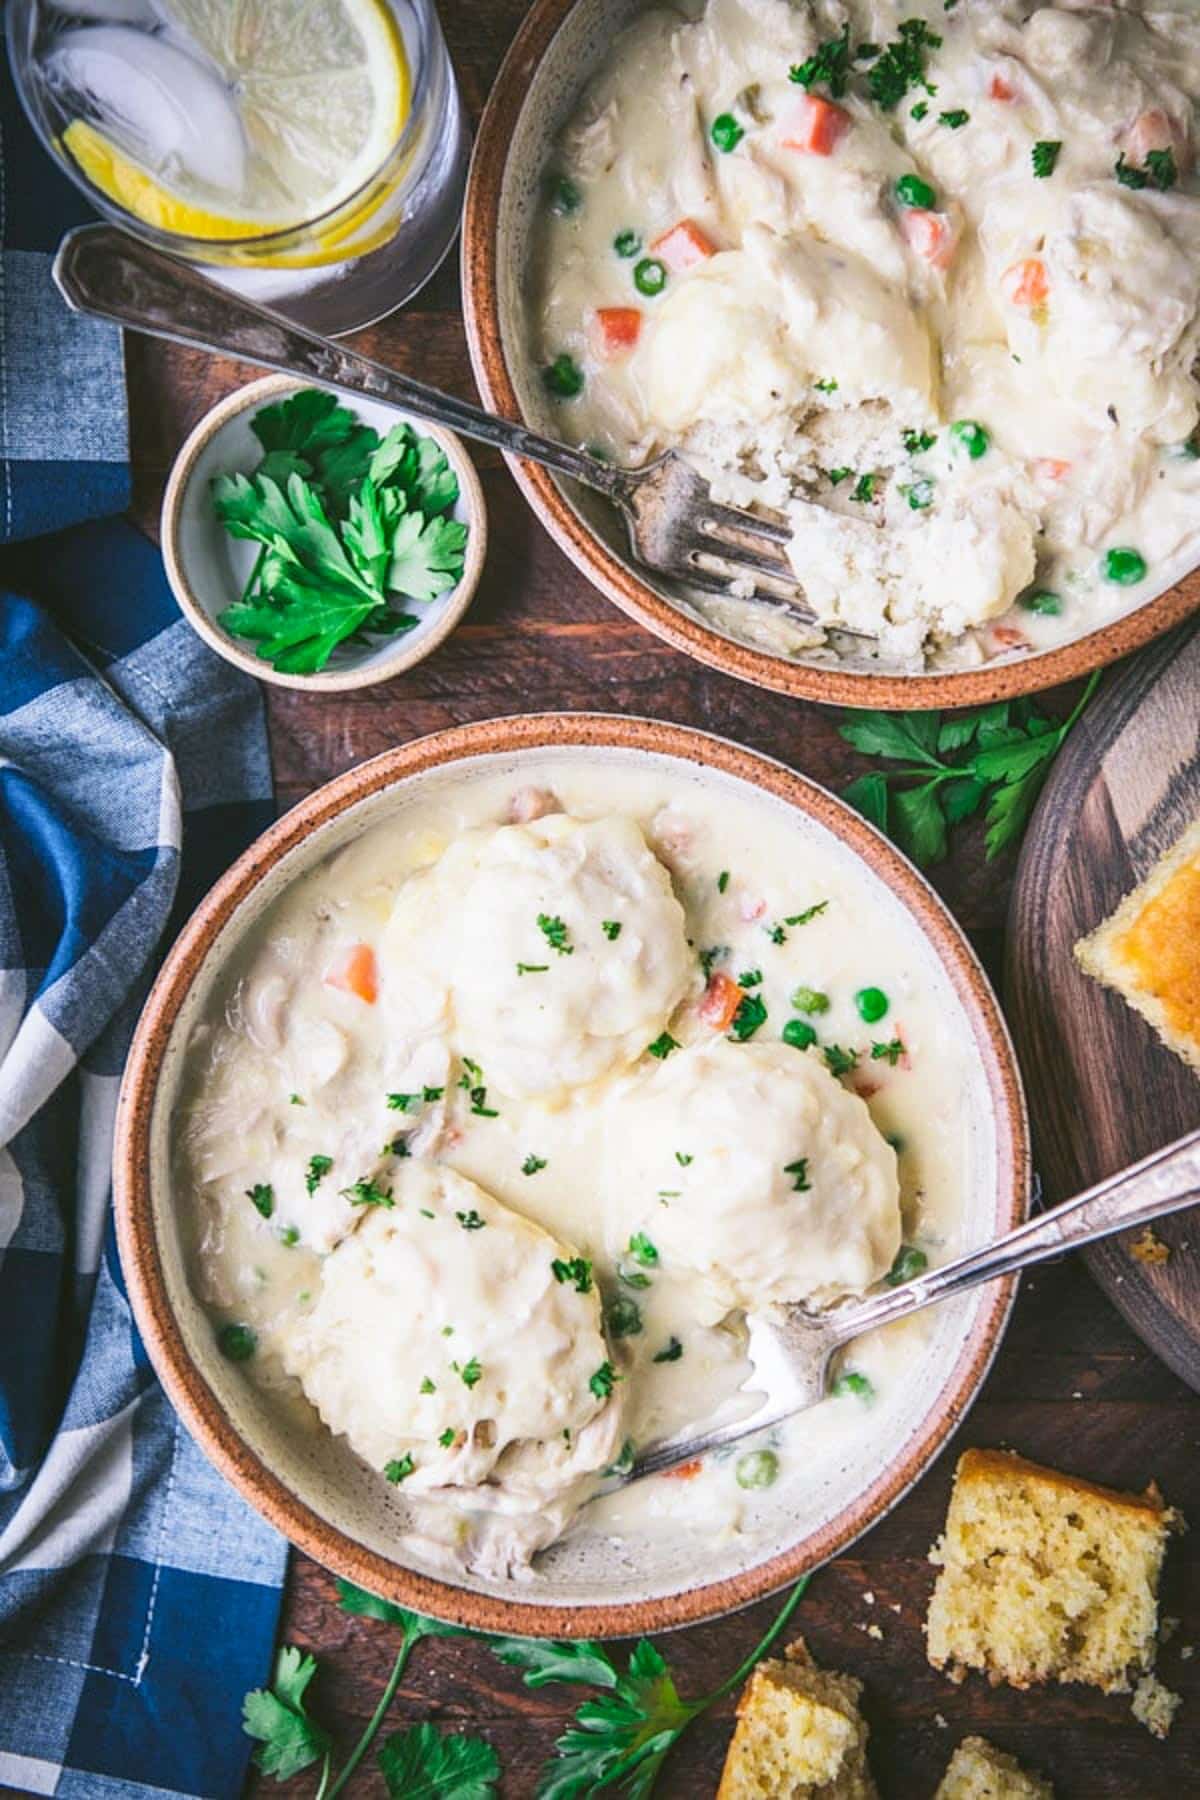 Bowl of bisquick dumplings on a wooden table with a creamy chicken gravy.